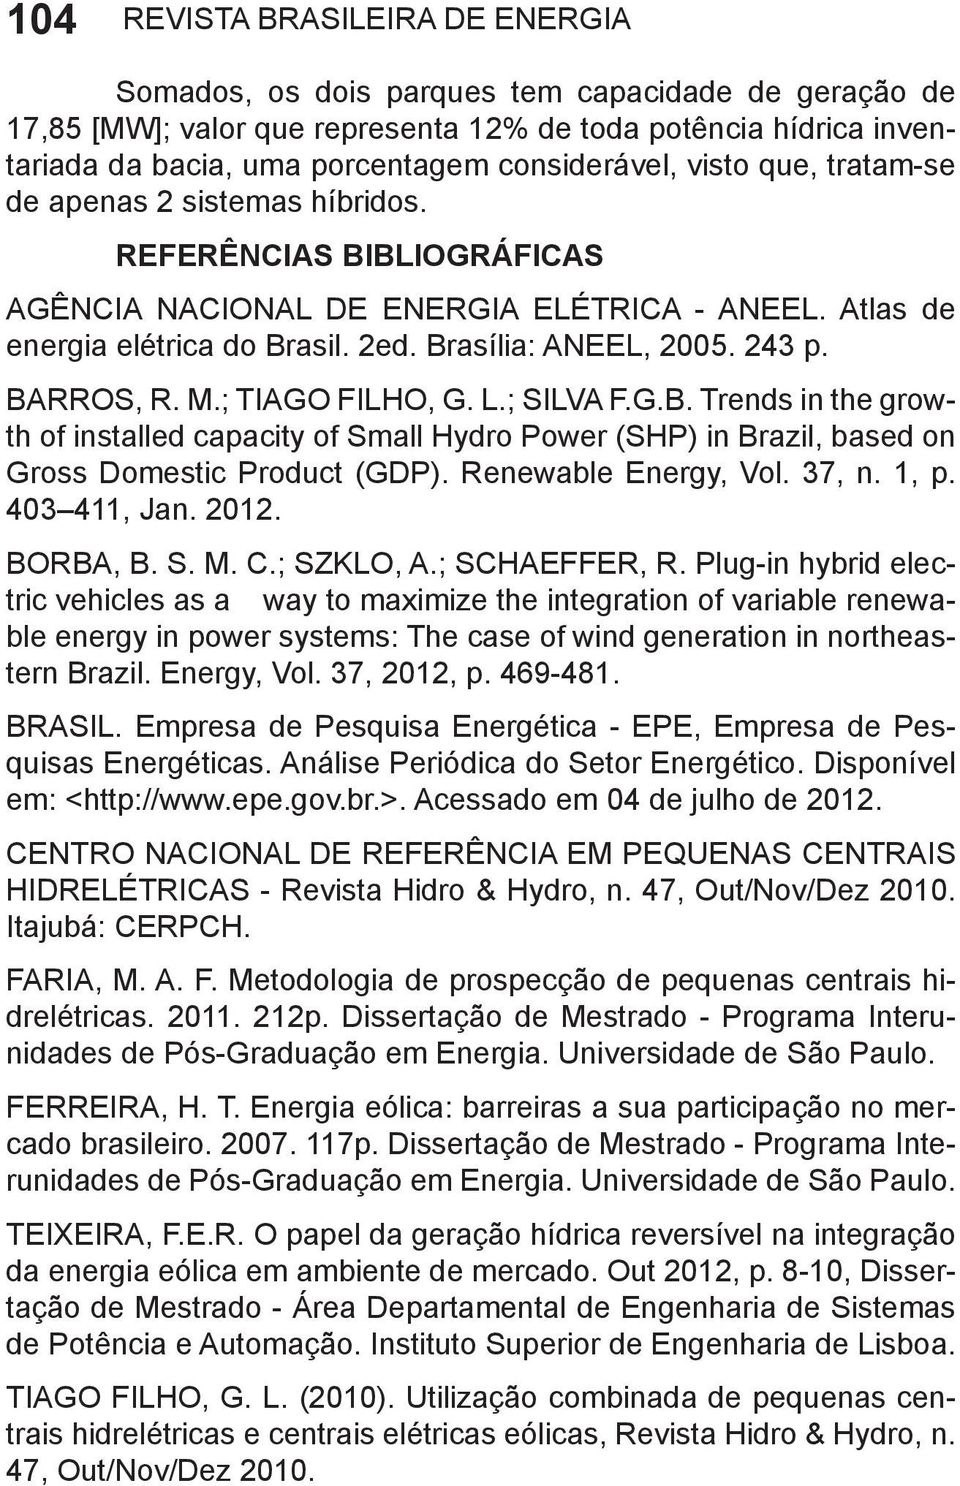 Brasília: ANEEL, 2005. 243 p. BARROS, R. M.; TIAGO FILHO, G. L.; SILVA F.G.B. Trends in the growth of installed capacity of Small Hydro Power (SHP) in Brazil, based on Gross Domestic Product (GDP).